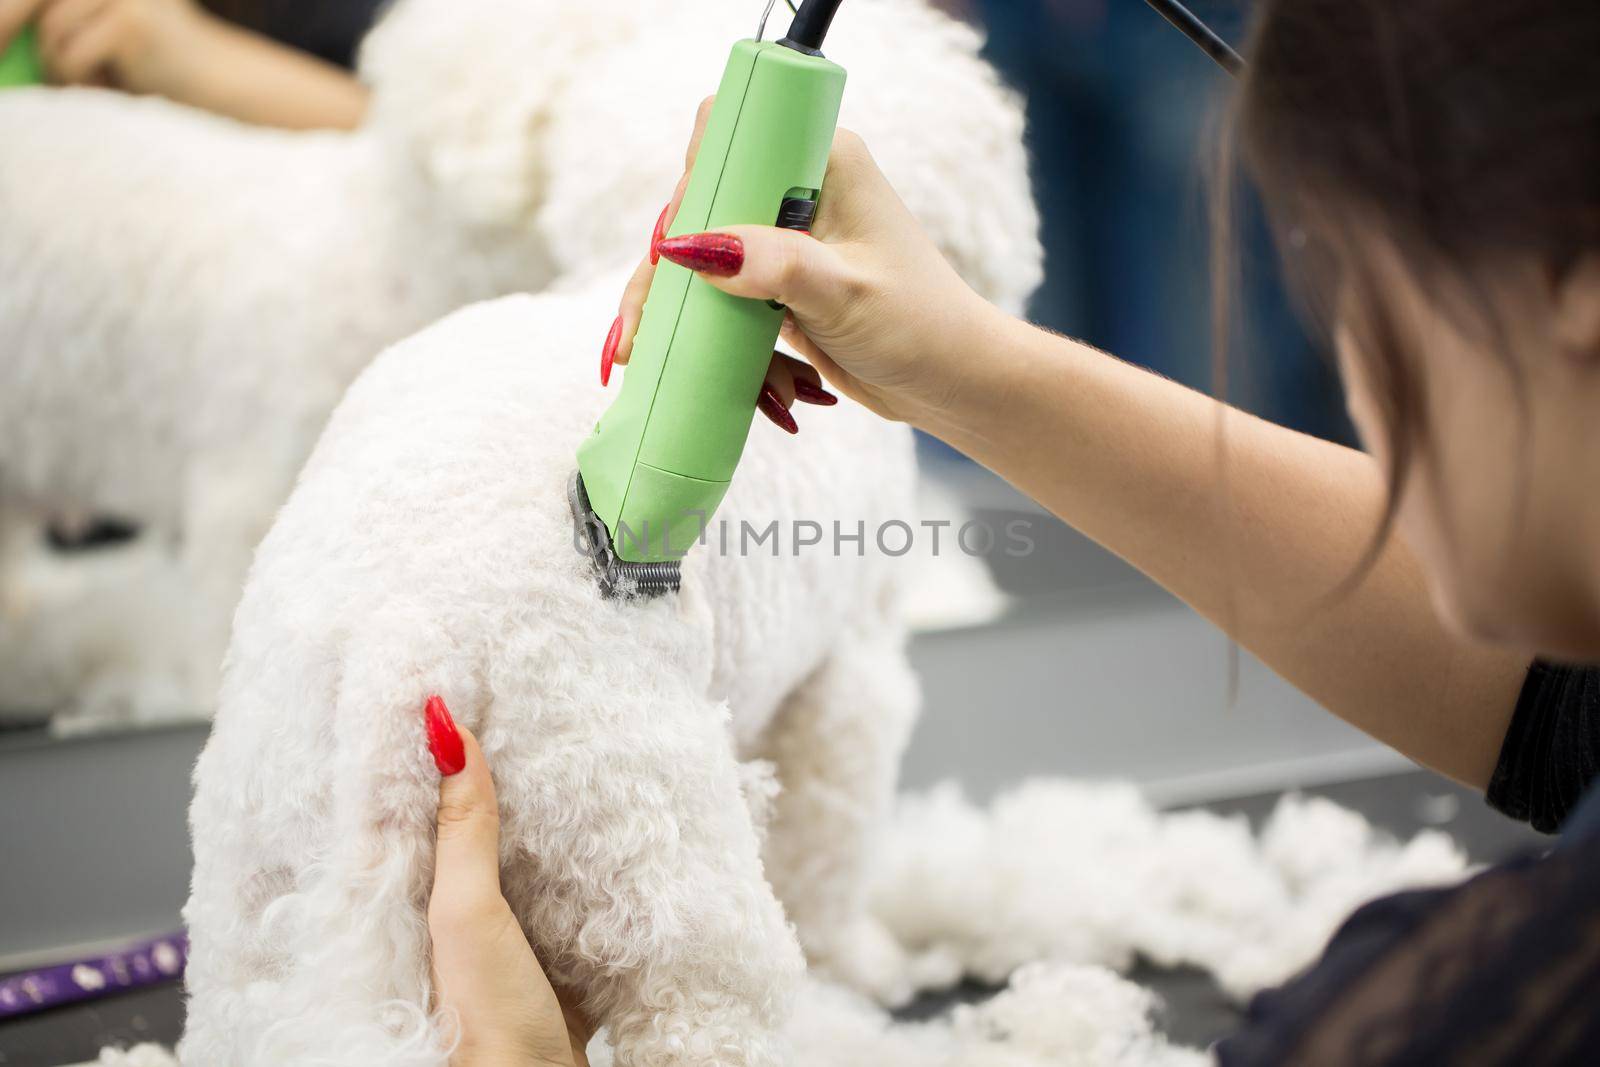 Groomer trimming a small dog Bichon Frise with an electric hair clipper. Cutting hair in the dog hairdresser a dog Bichon Frise. Hairdresser for animals